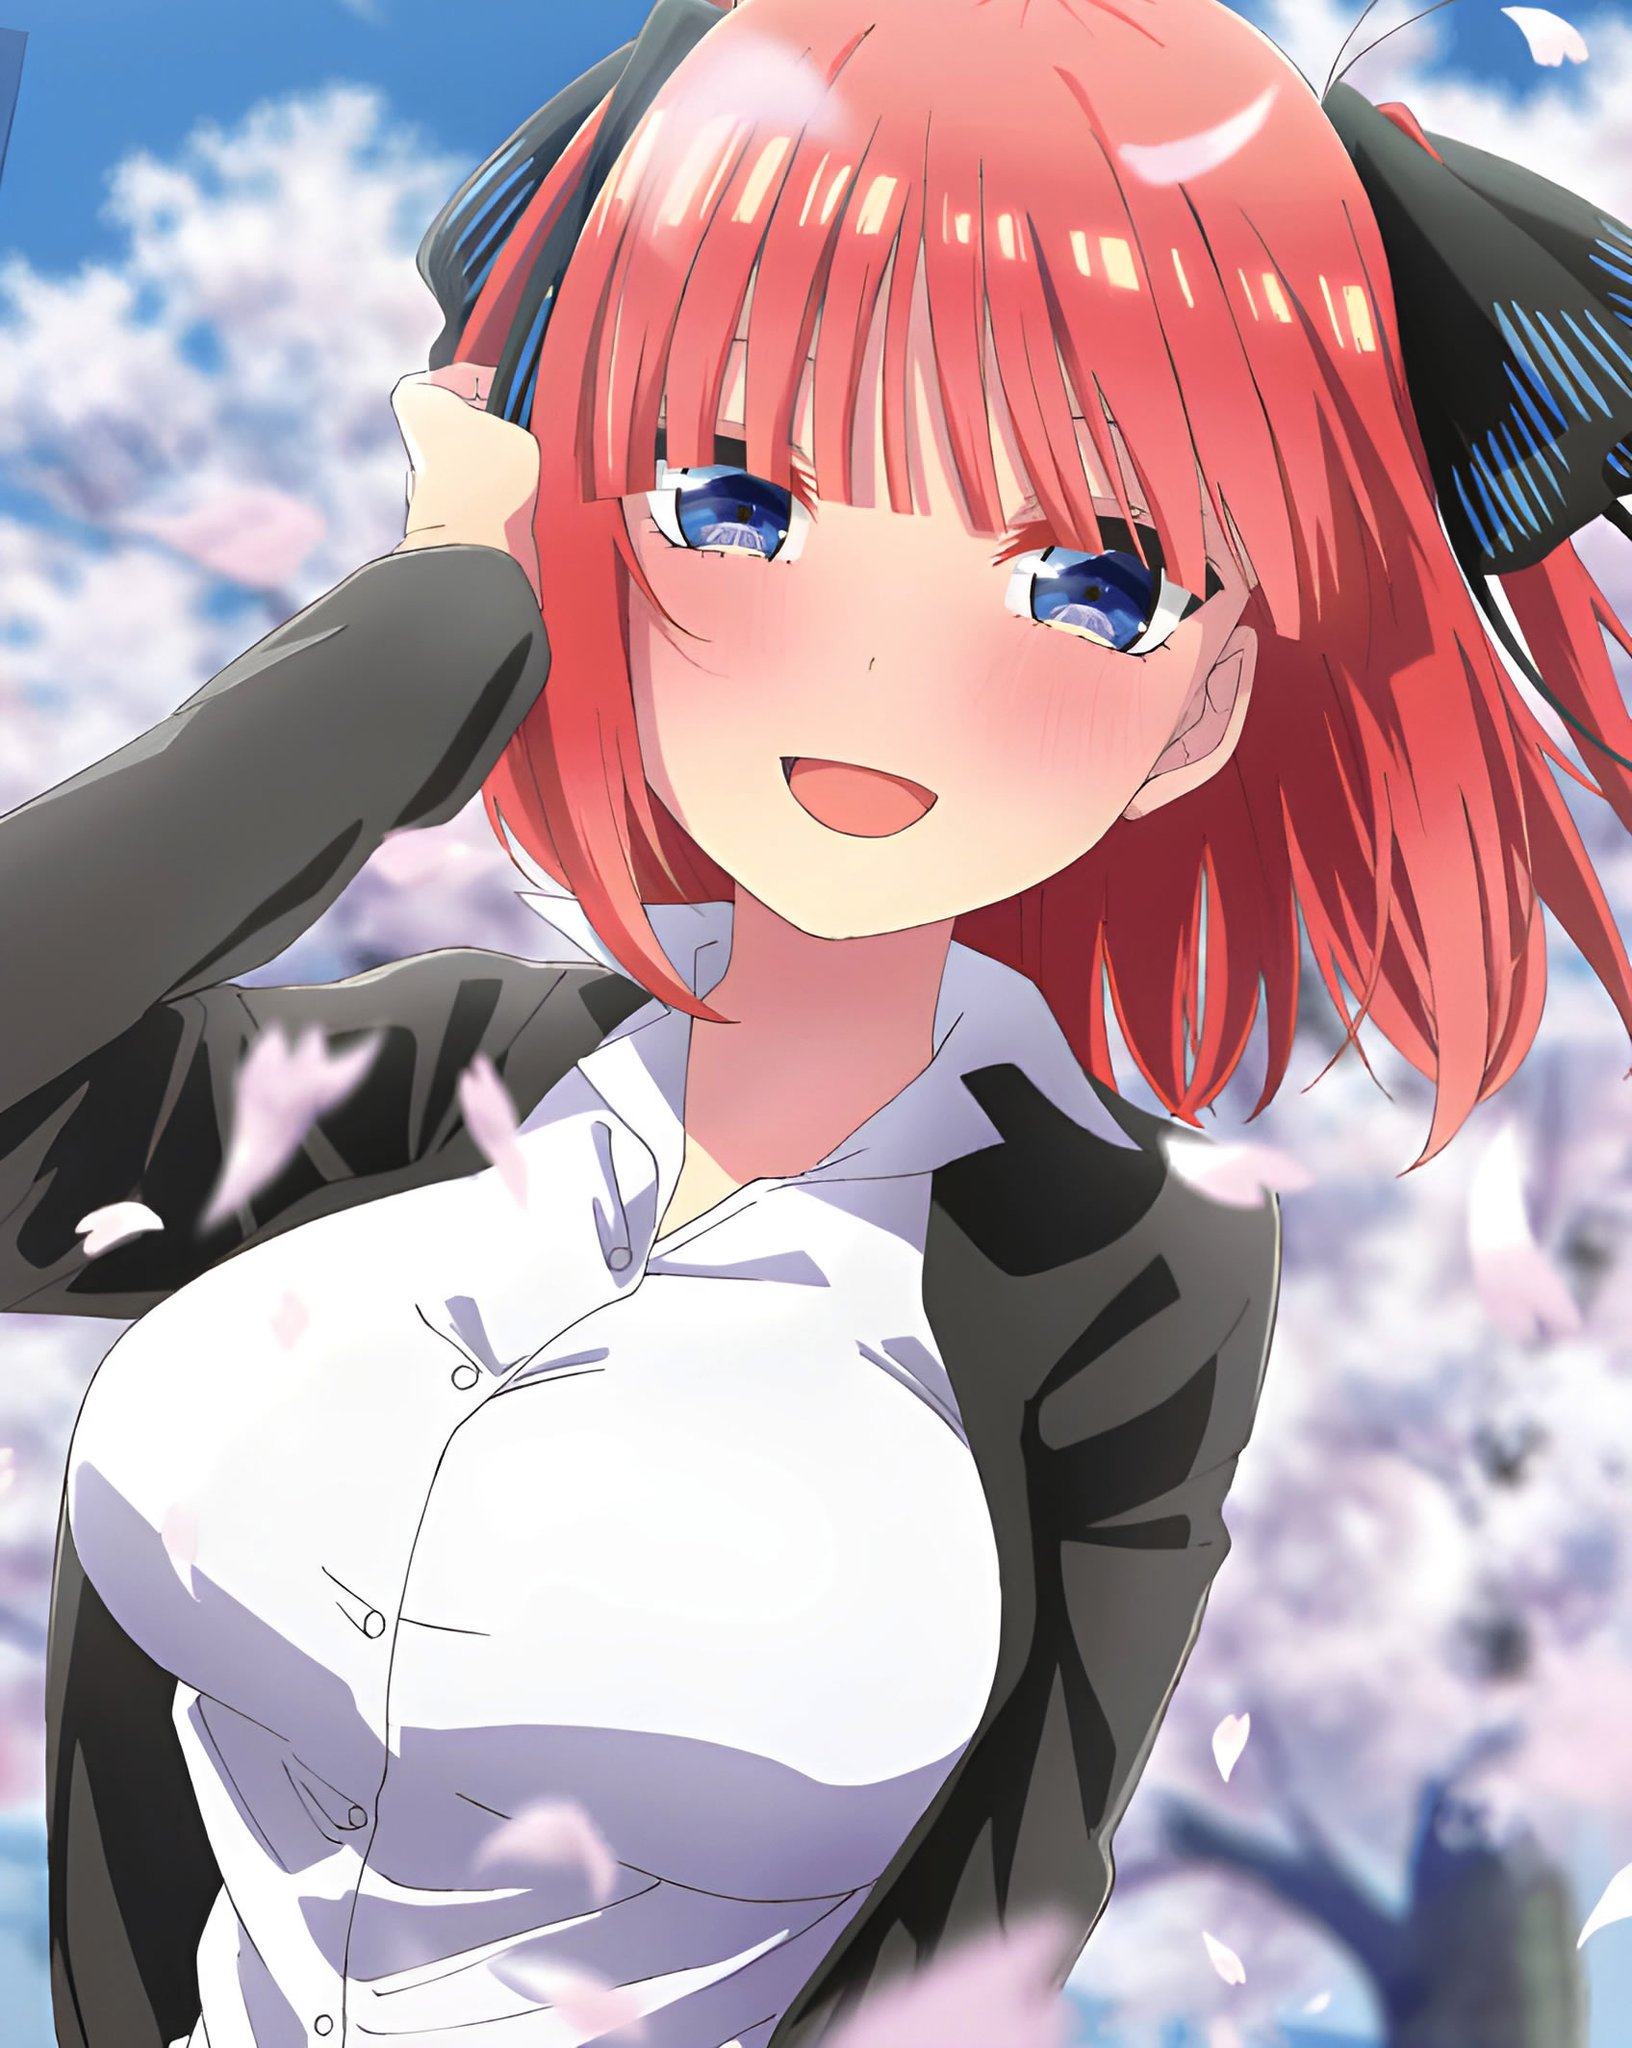 The Quintessential Quintuplets - Nino Nakano - Image Abyss